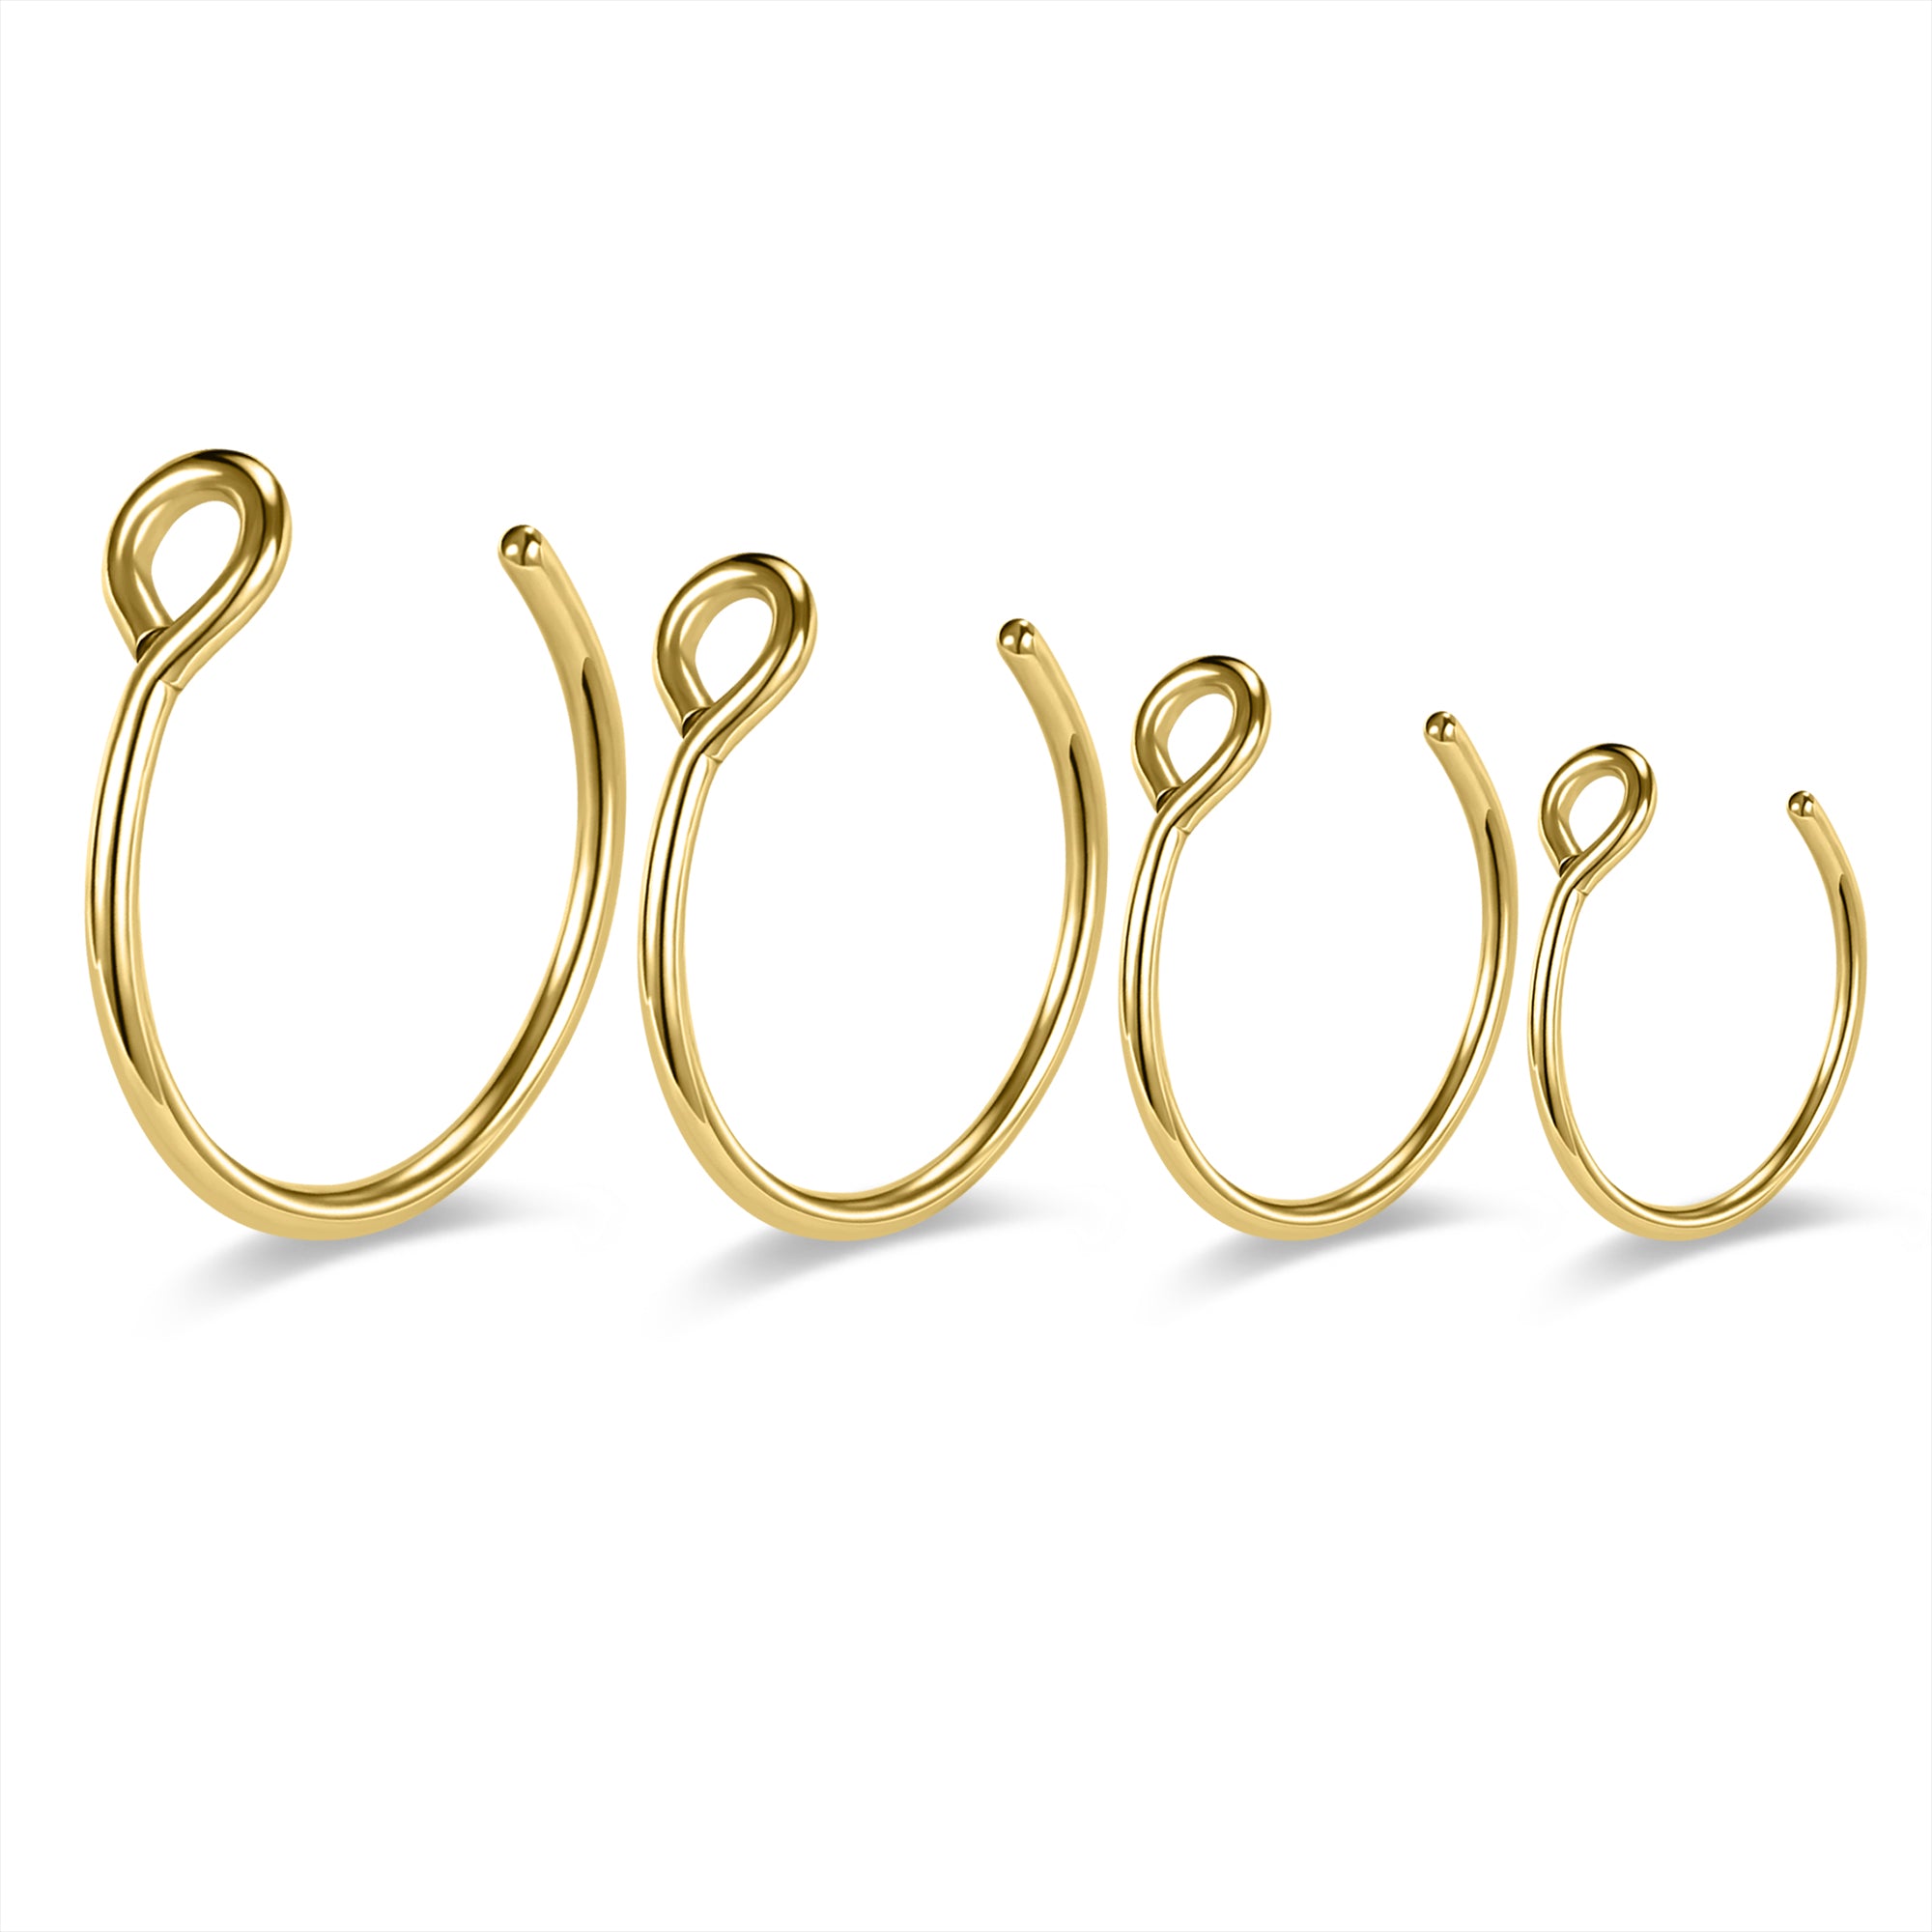 4-Pcs-Set-20G-Open-End-Nose-Rings-C-Shaped-Septum-Rings-Stainless-Steel-Ear-Cartilage-Tragus-Conch-Helix-Piercing